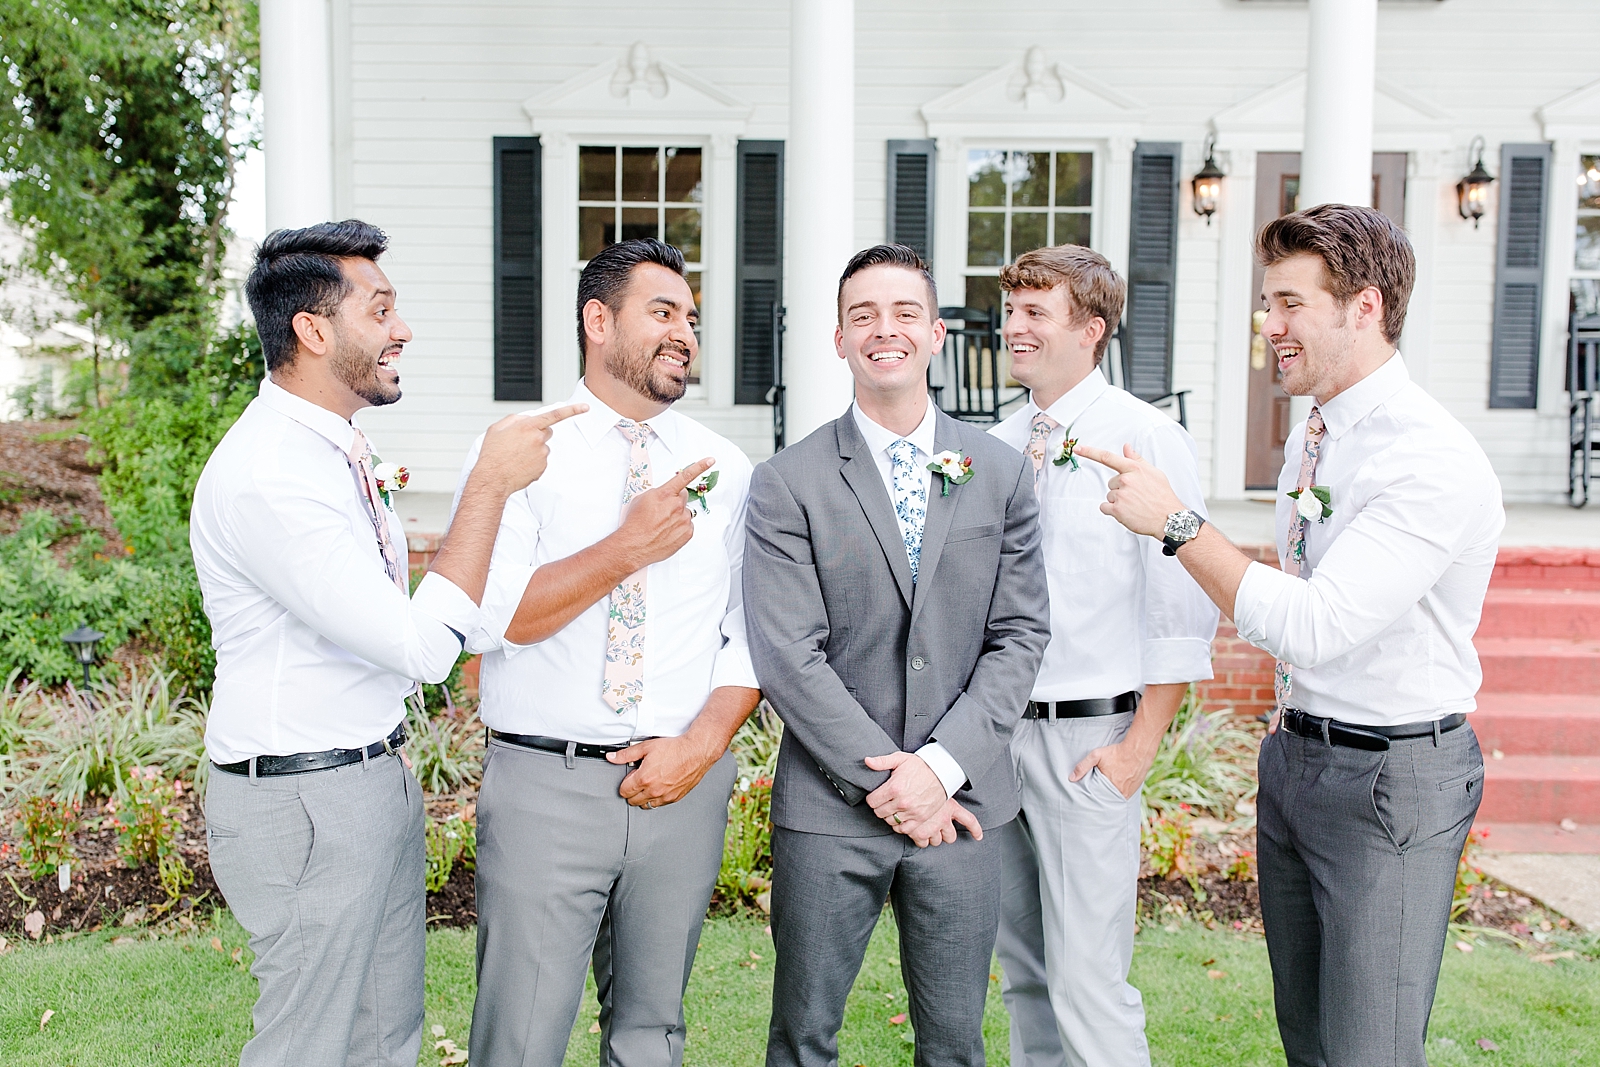 Dahlonega Wedding Venue Groom and Groomsmen laughing in front of The 1888 House Photo